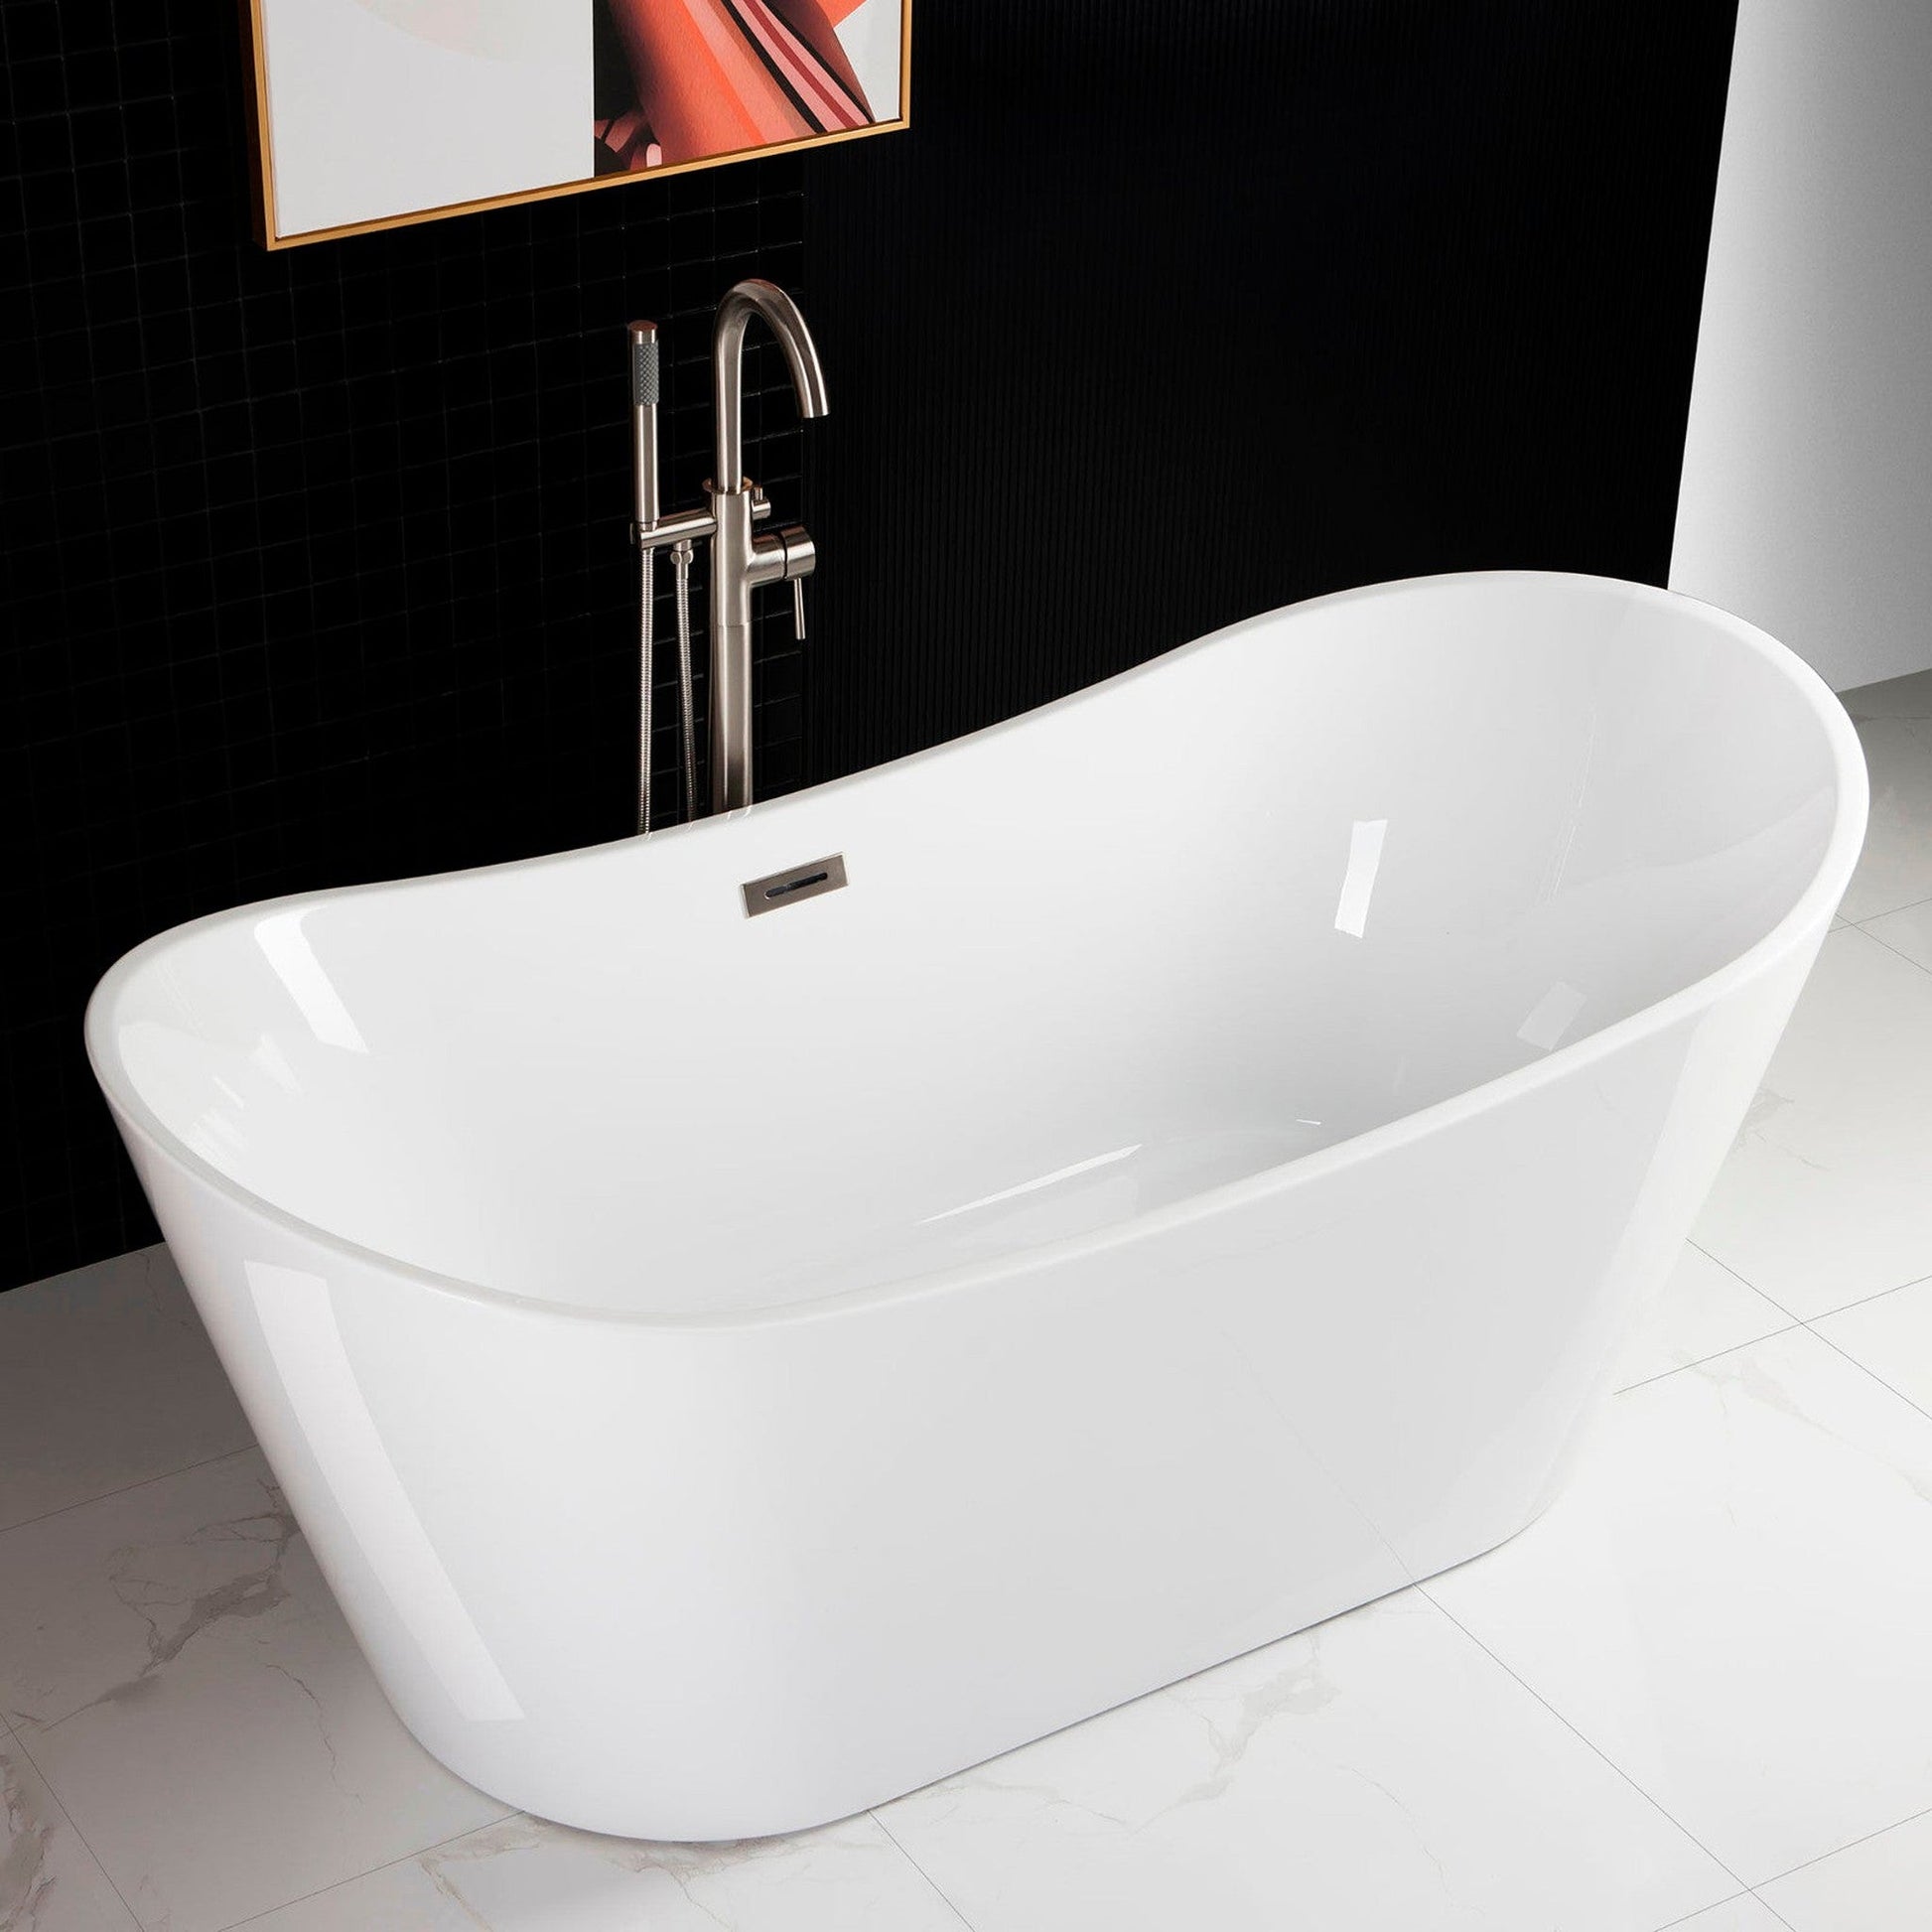 WoodBridge B0010 67" White Acrylic Freestanding Contemporary Soaking Bathtub With Chrome Drain, Overflow, F-0004 Tub Filler and Caddy Tray